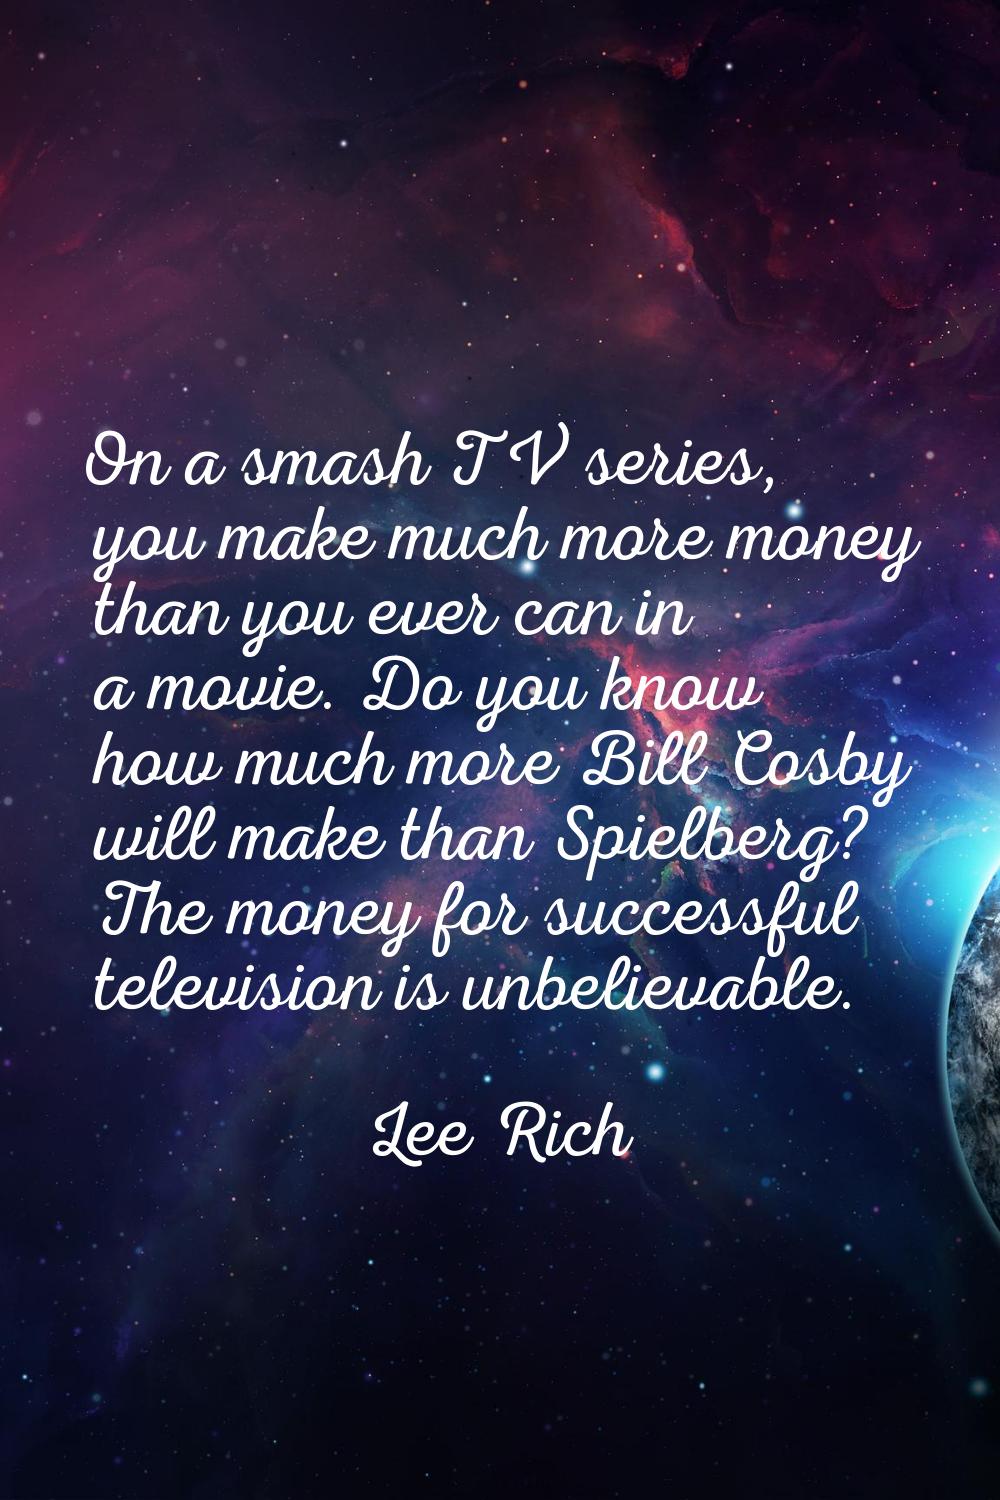 On a smash TV series, you make much more money than you ever can in a movie. Do you know how much m